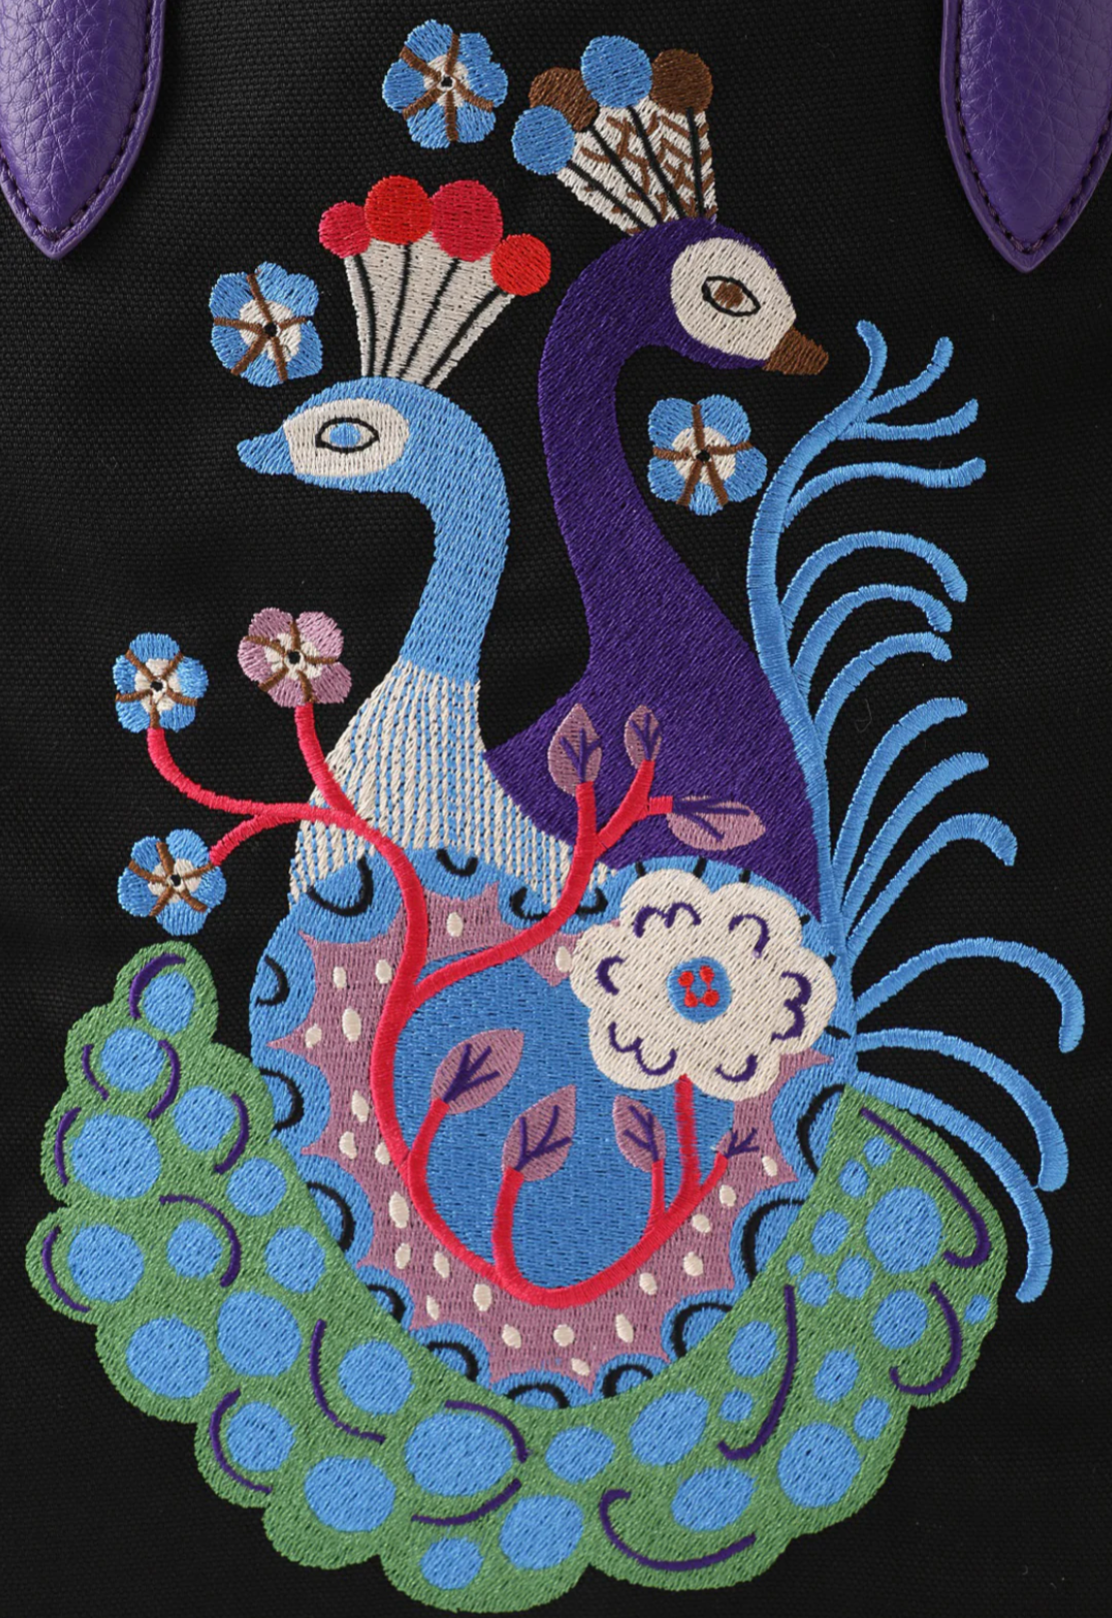 Peacock Tote Bag, print shows two entrancing peacocks with wild flowers and frilly feathers